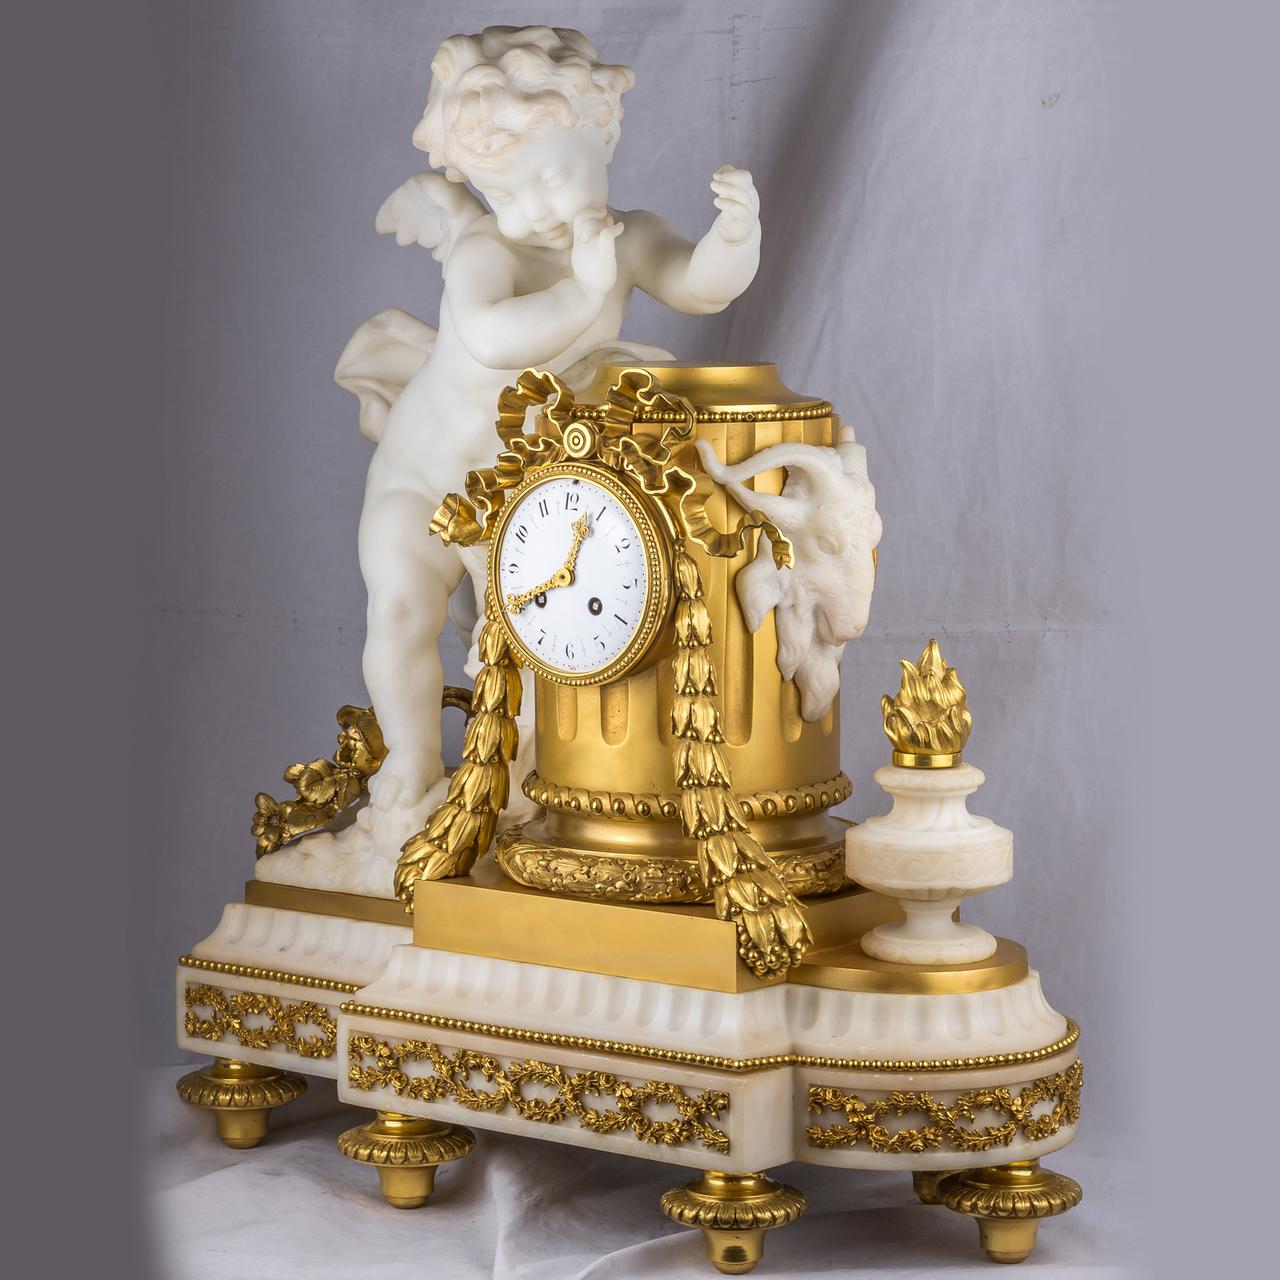 Exquisite Quality French Ormolu and White Marble Winged Cherub Clock.

Date: 19th century
Origin: French
Dimension: 25 1/2 in. high, 23 in. wide, 10 1/2 in. deep